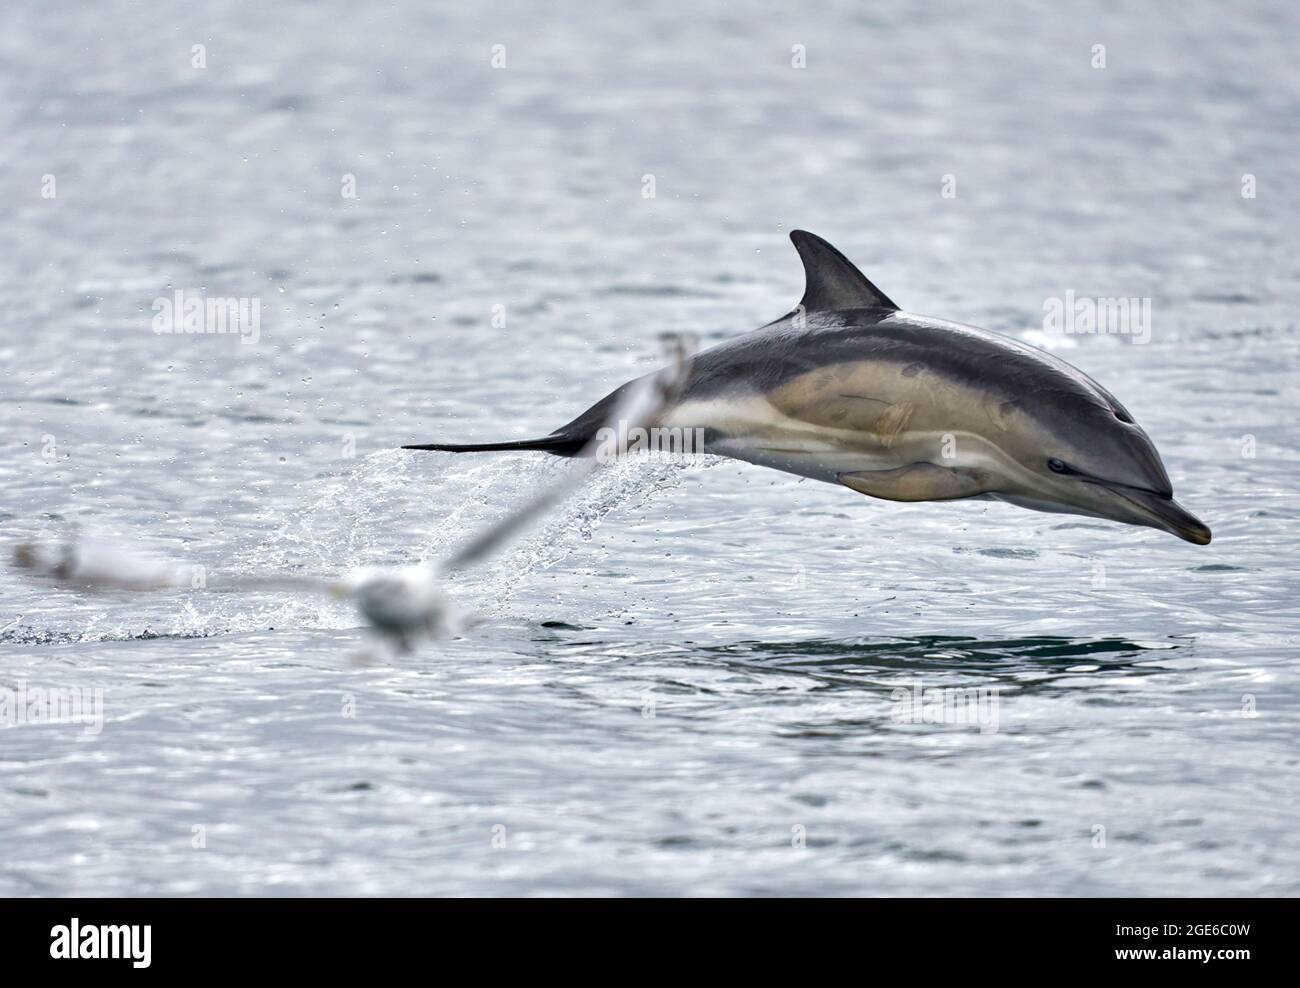 Telephoto shot of short beaked common dolphin airborne at sea being photobombed by a gull. Taken from a boat on the way to the Shiant Isles. Stock Photo